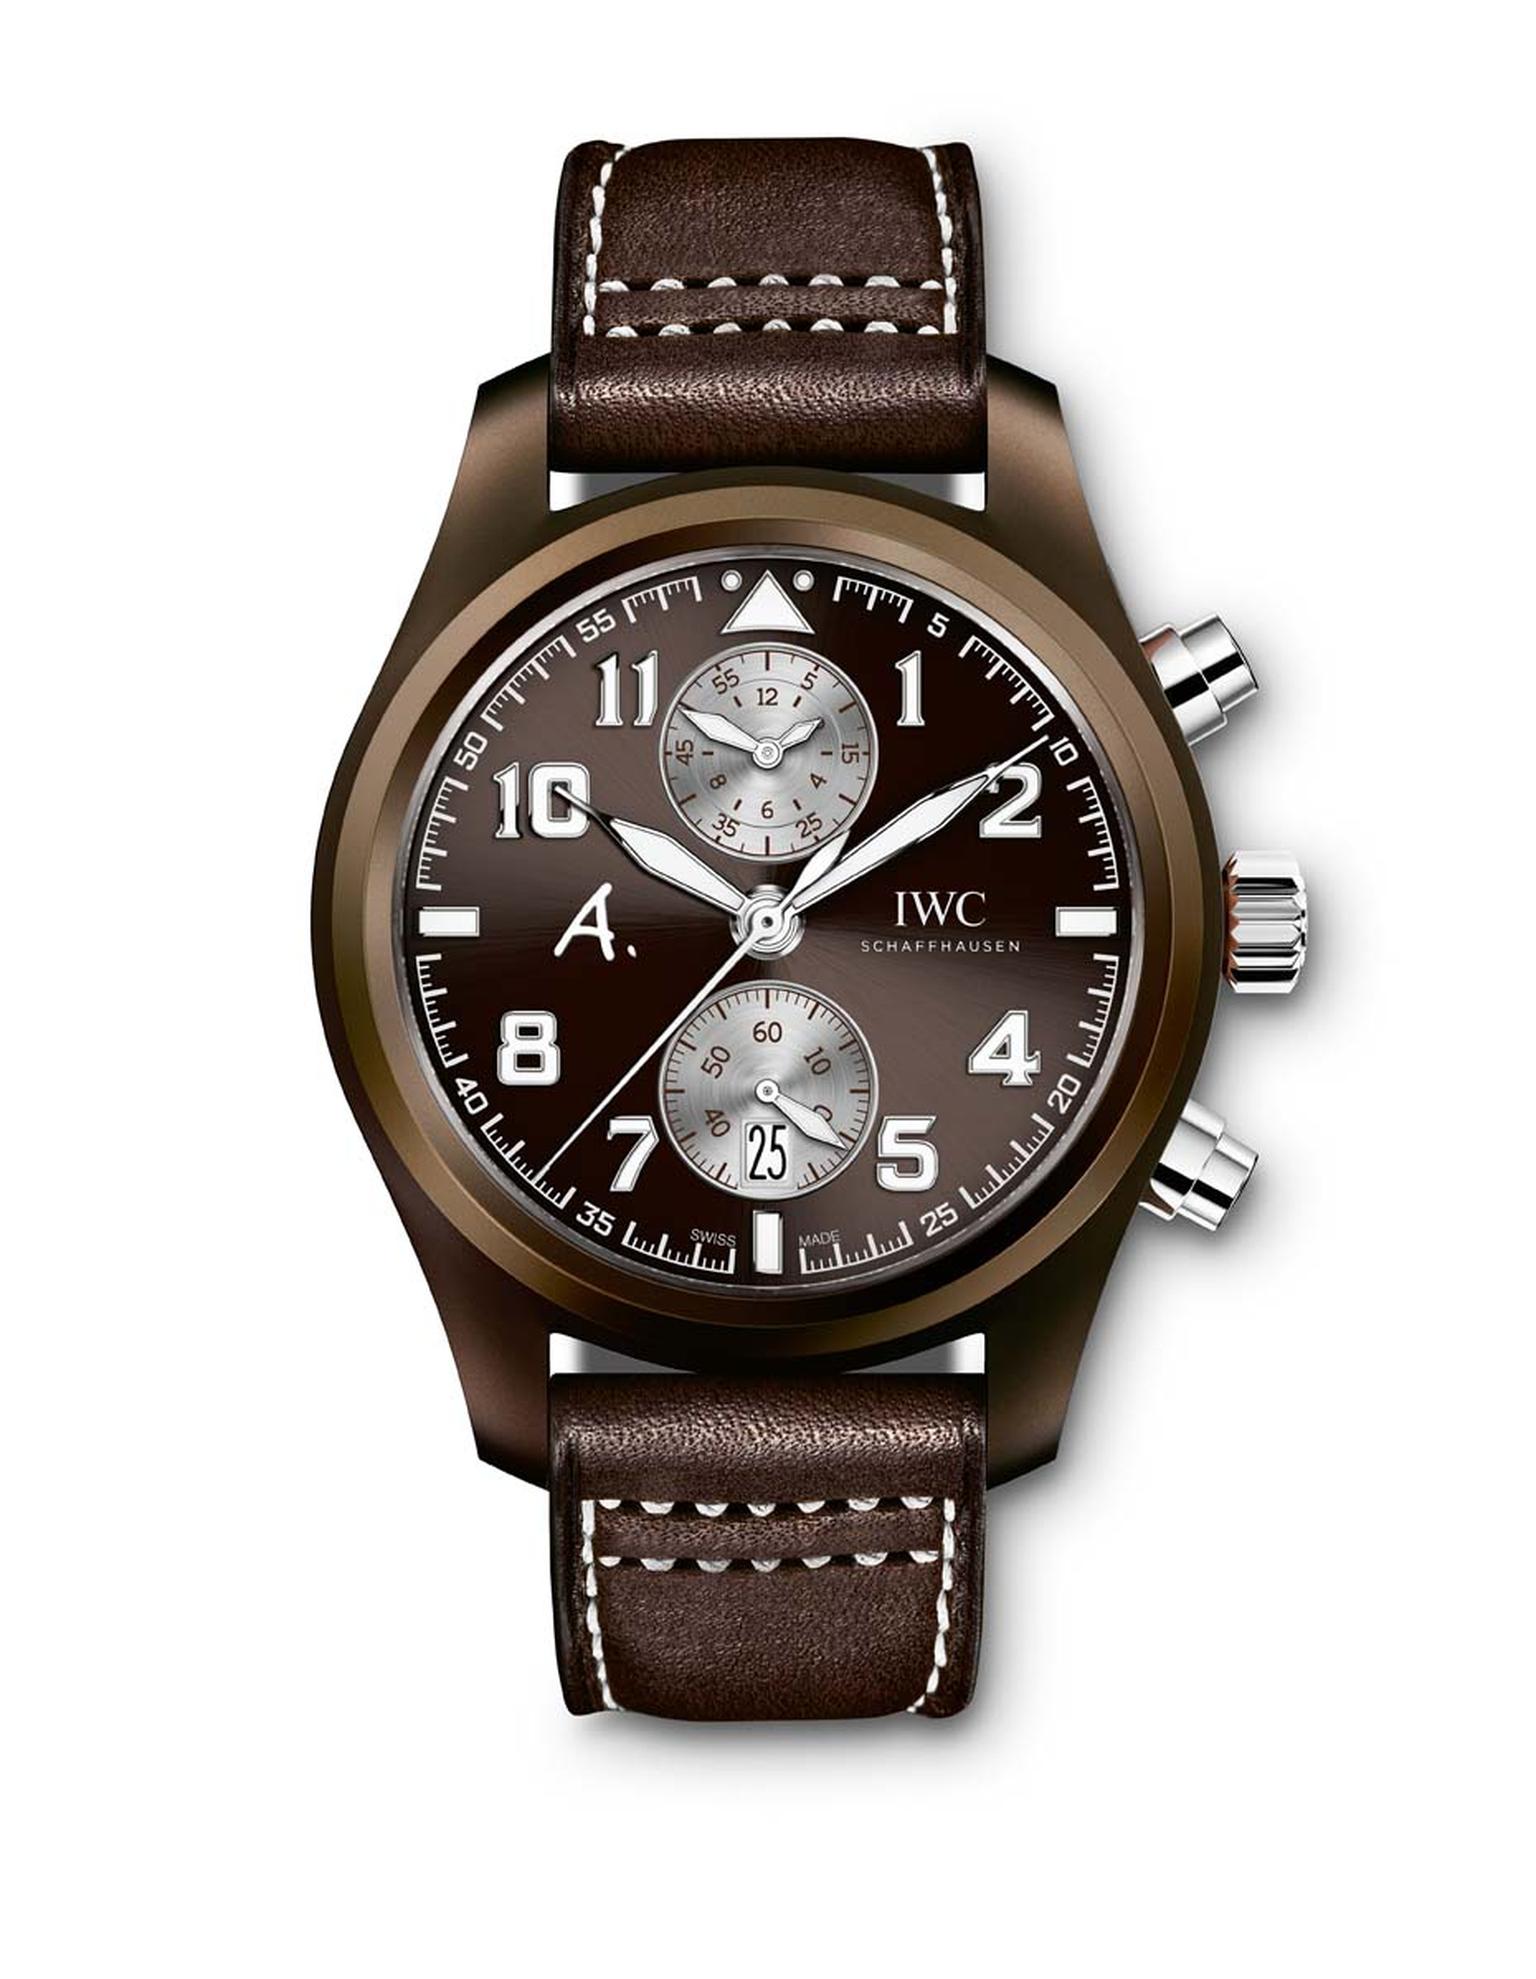 IWC's Pilot’s Edition "The Last Flight" watch, with an automatic chronograph movement and an in-house calibre 89361, is now available in brown ceramic, which is lighter than steel and practically scratch resistant